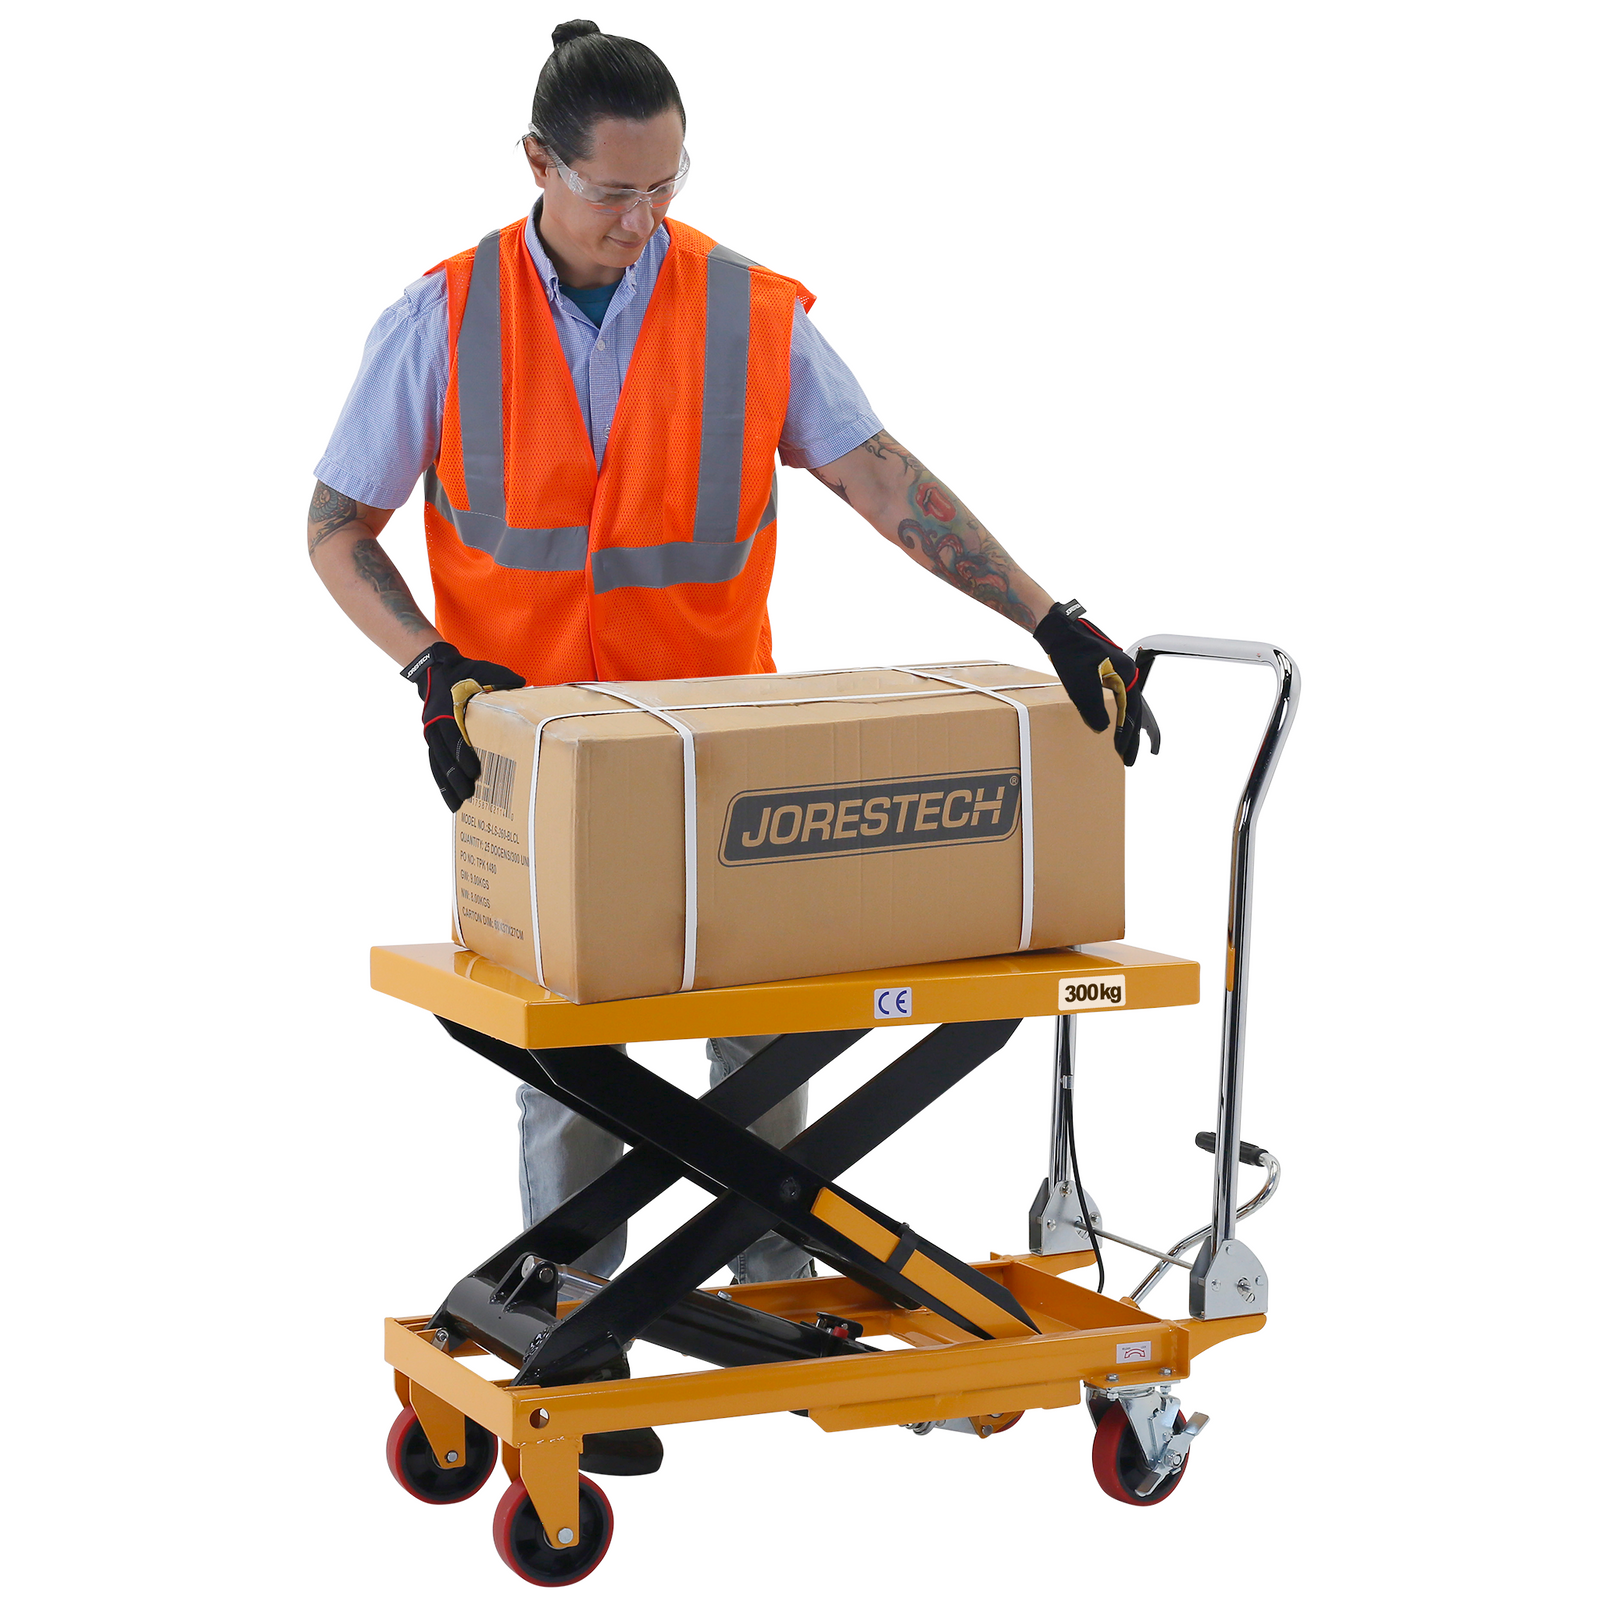 A man wearing an orange safety vest is removing a heavy box from the JORESTECH table lift at a comfortable height because the table is lifted